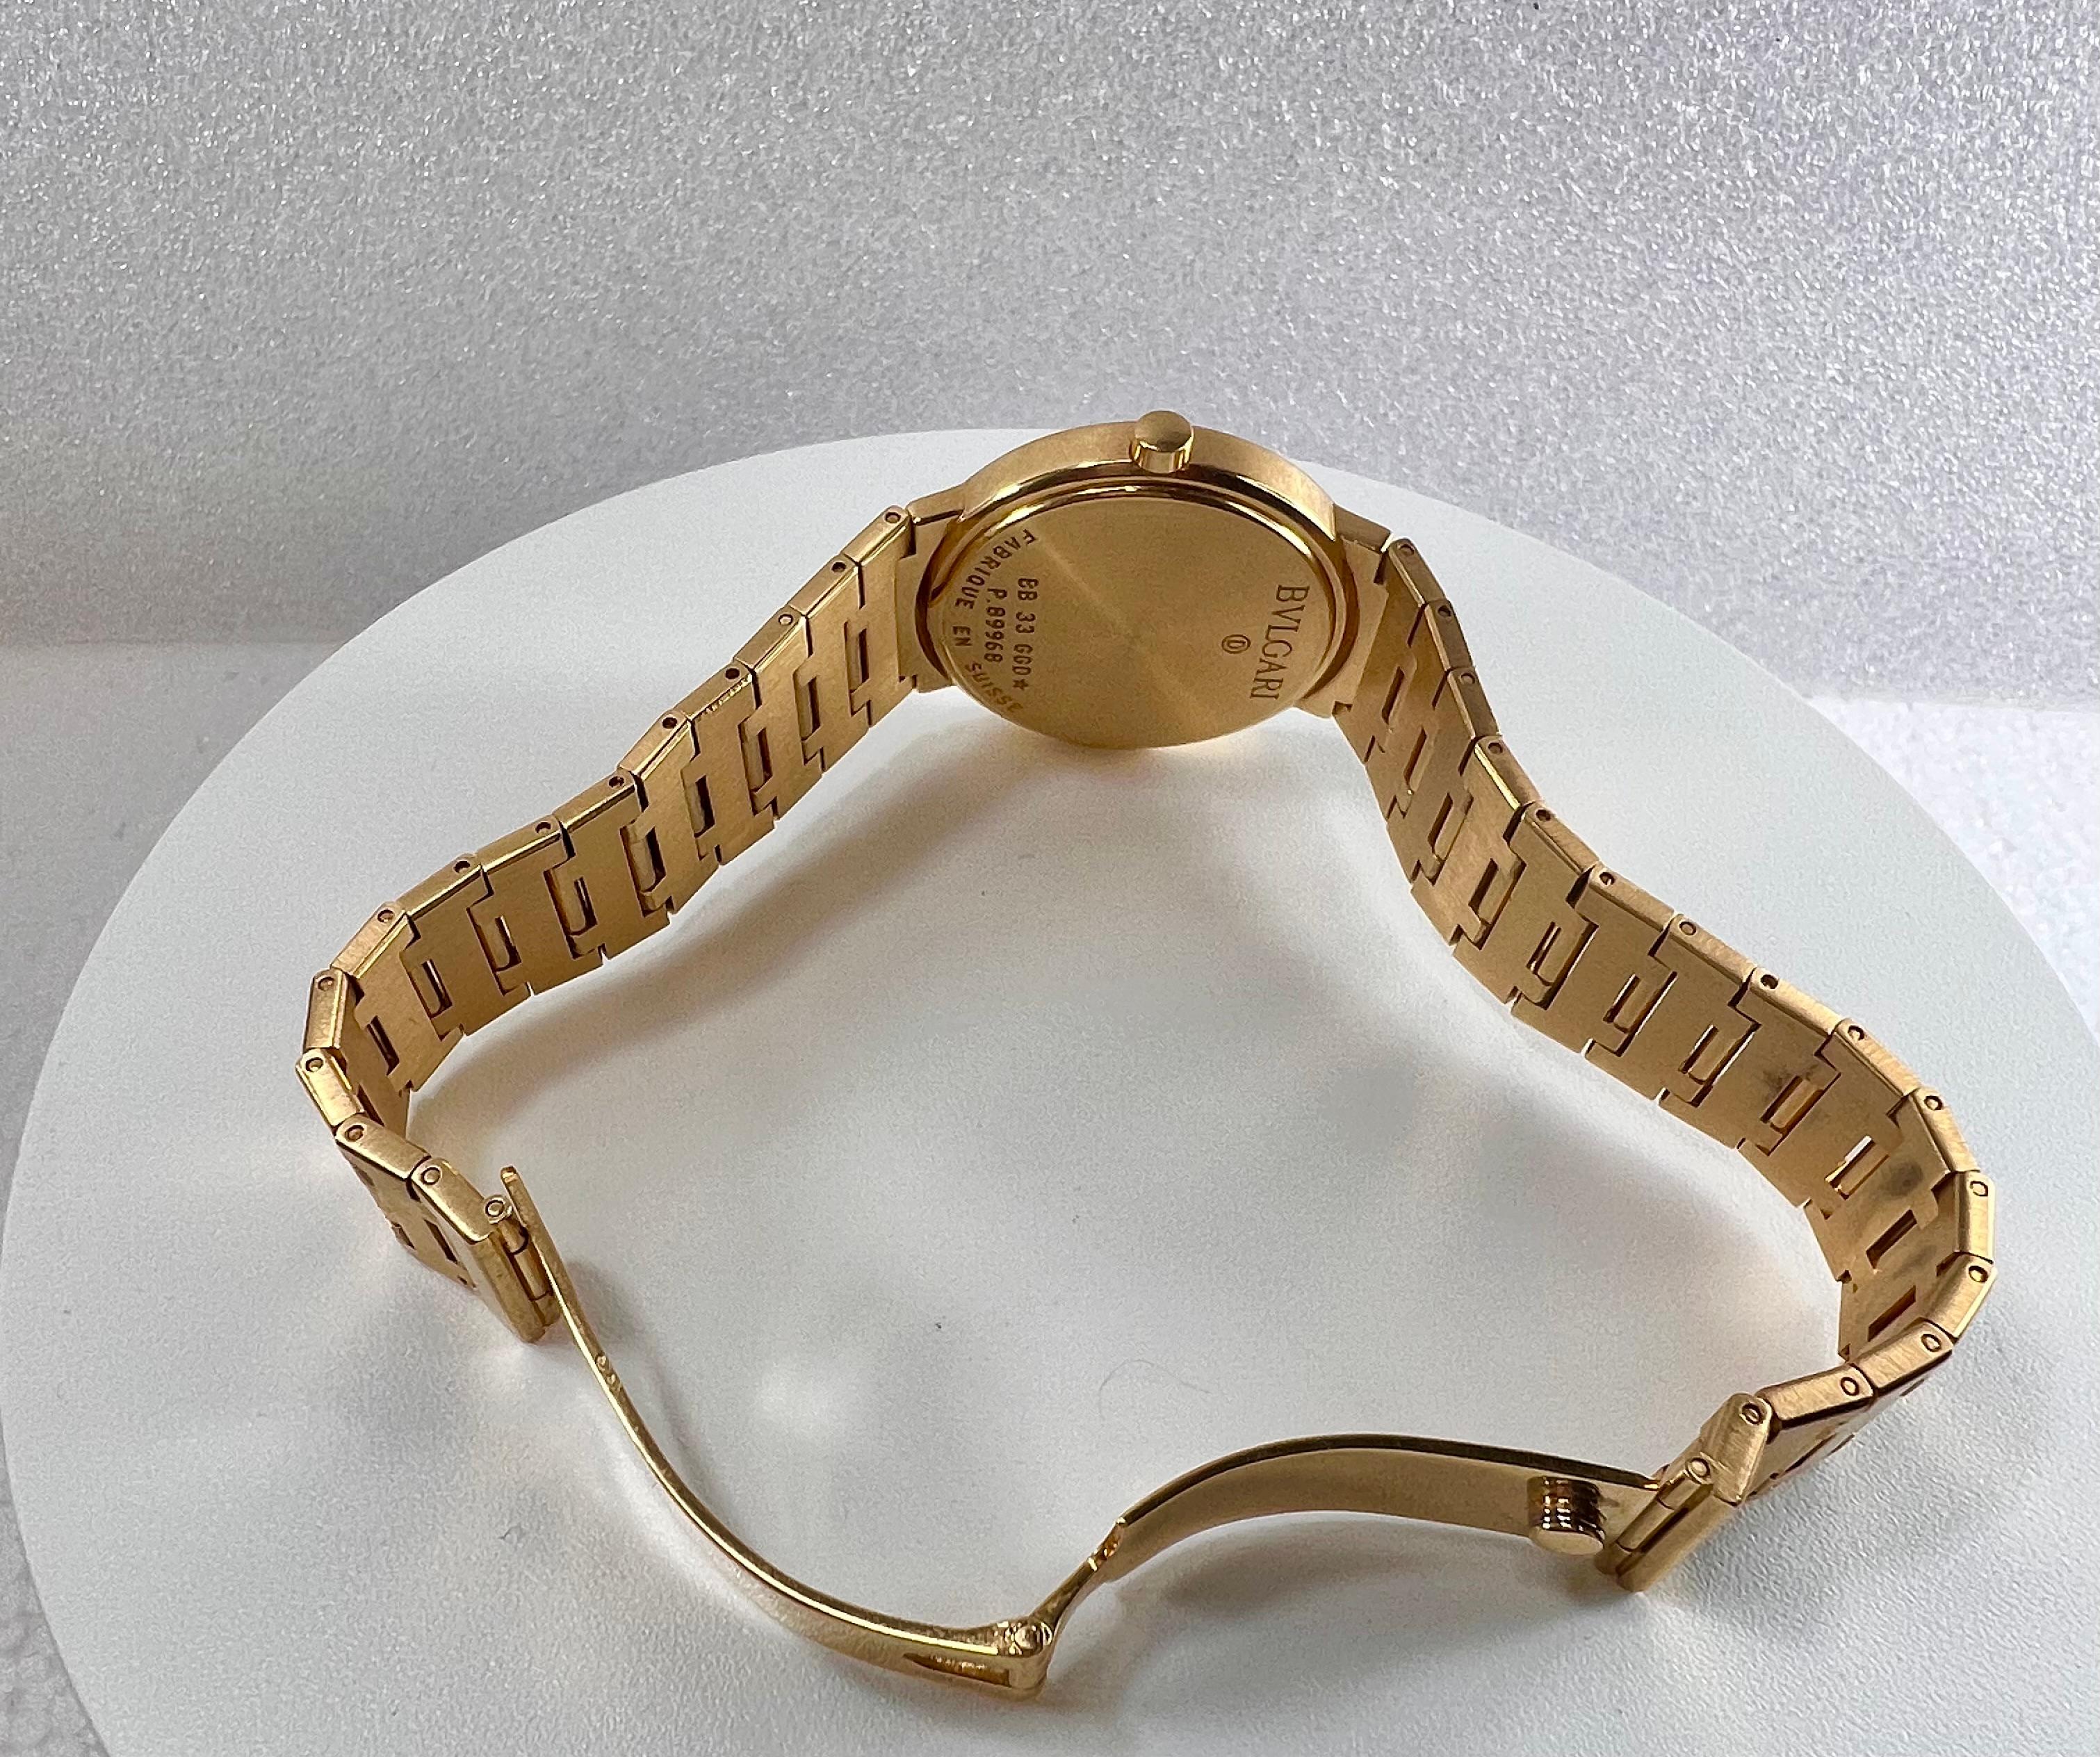 Bvlgari Bulgari Yellow Gold Watch with Black Face All Gold Deployant Clasp For Sale 3